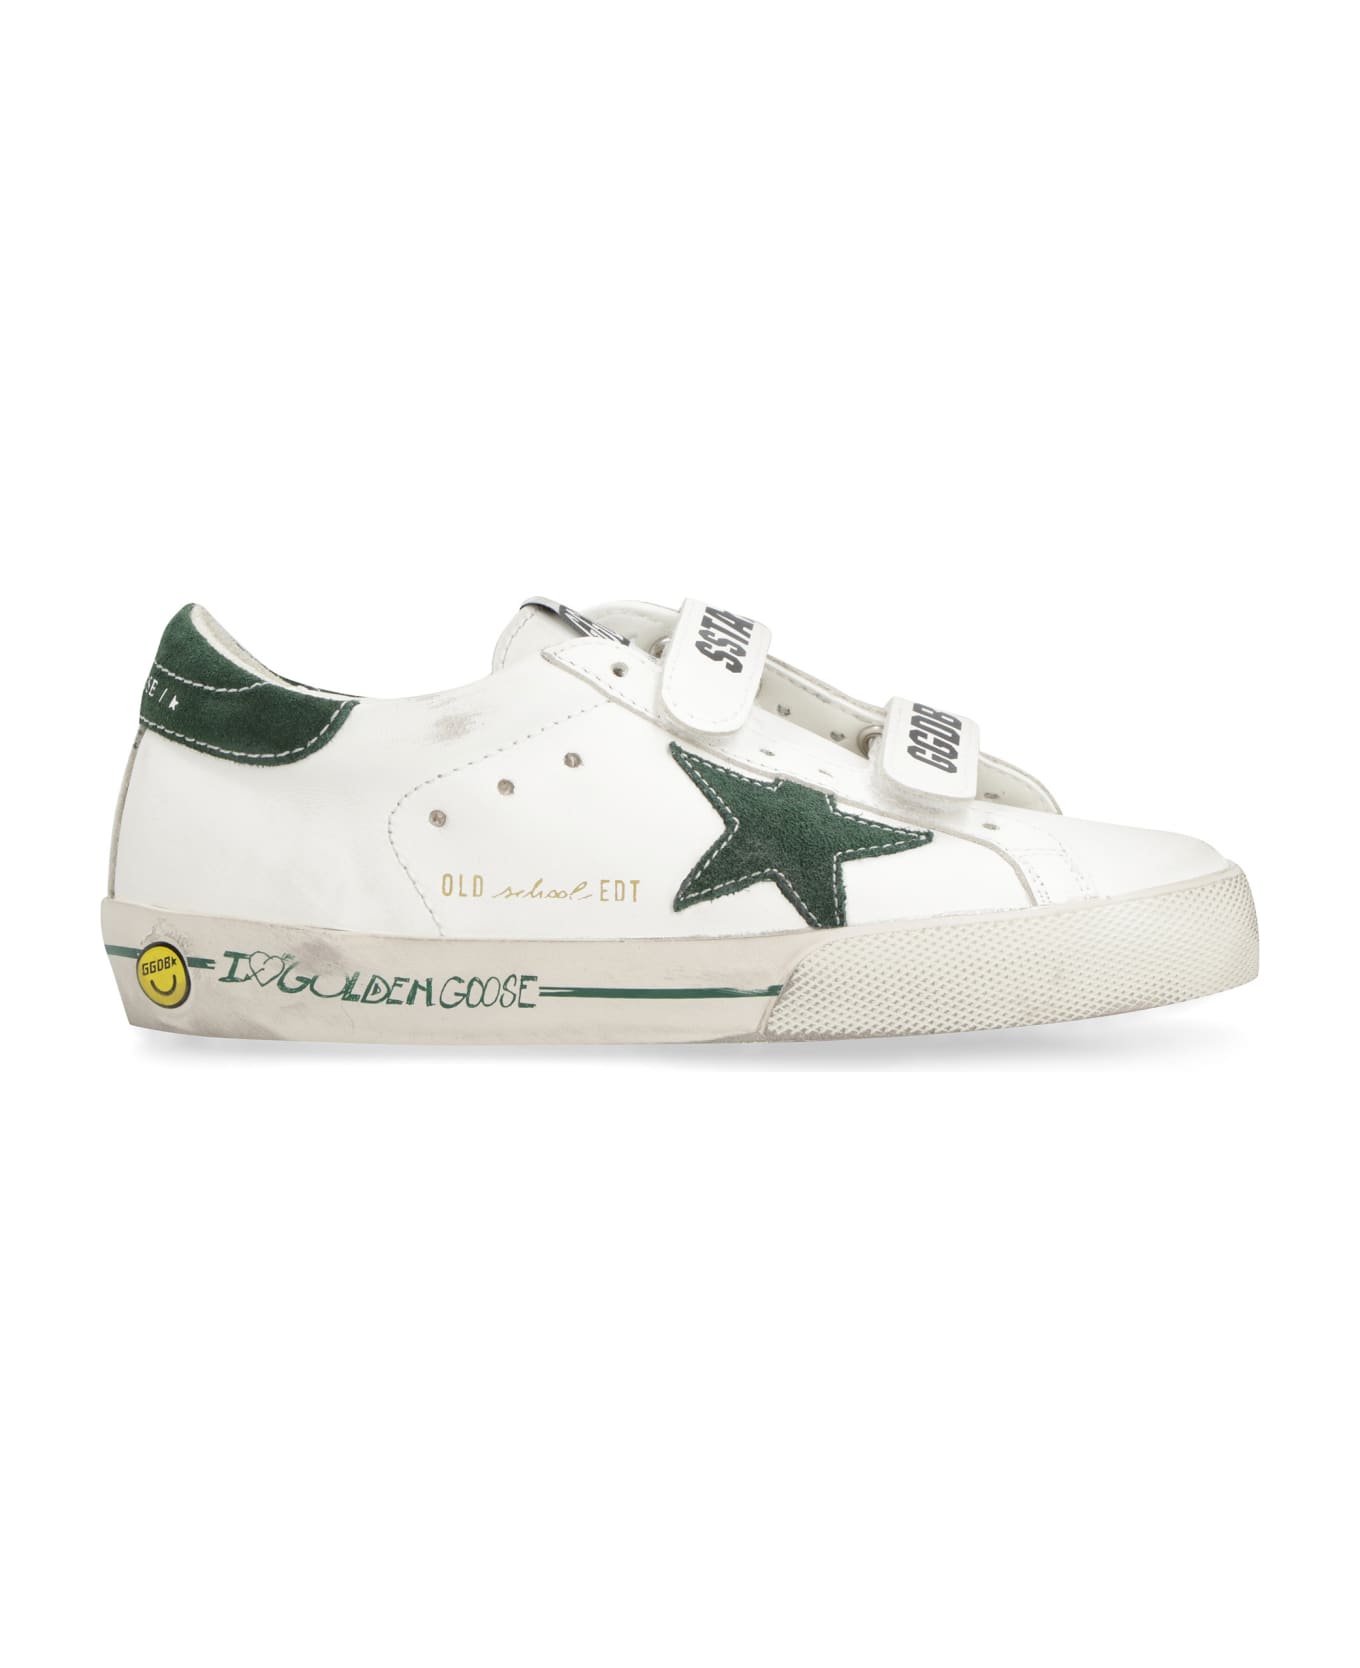 Golden Goose Old School Leather Sneakers - White シューズ